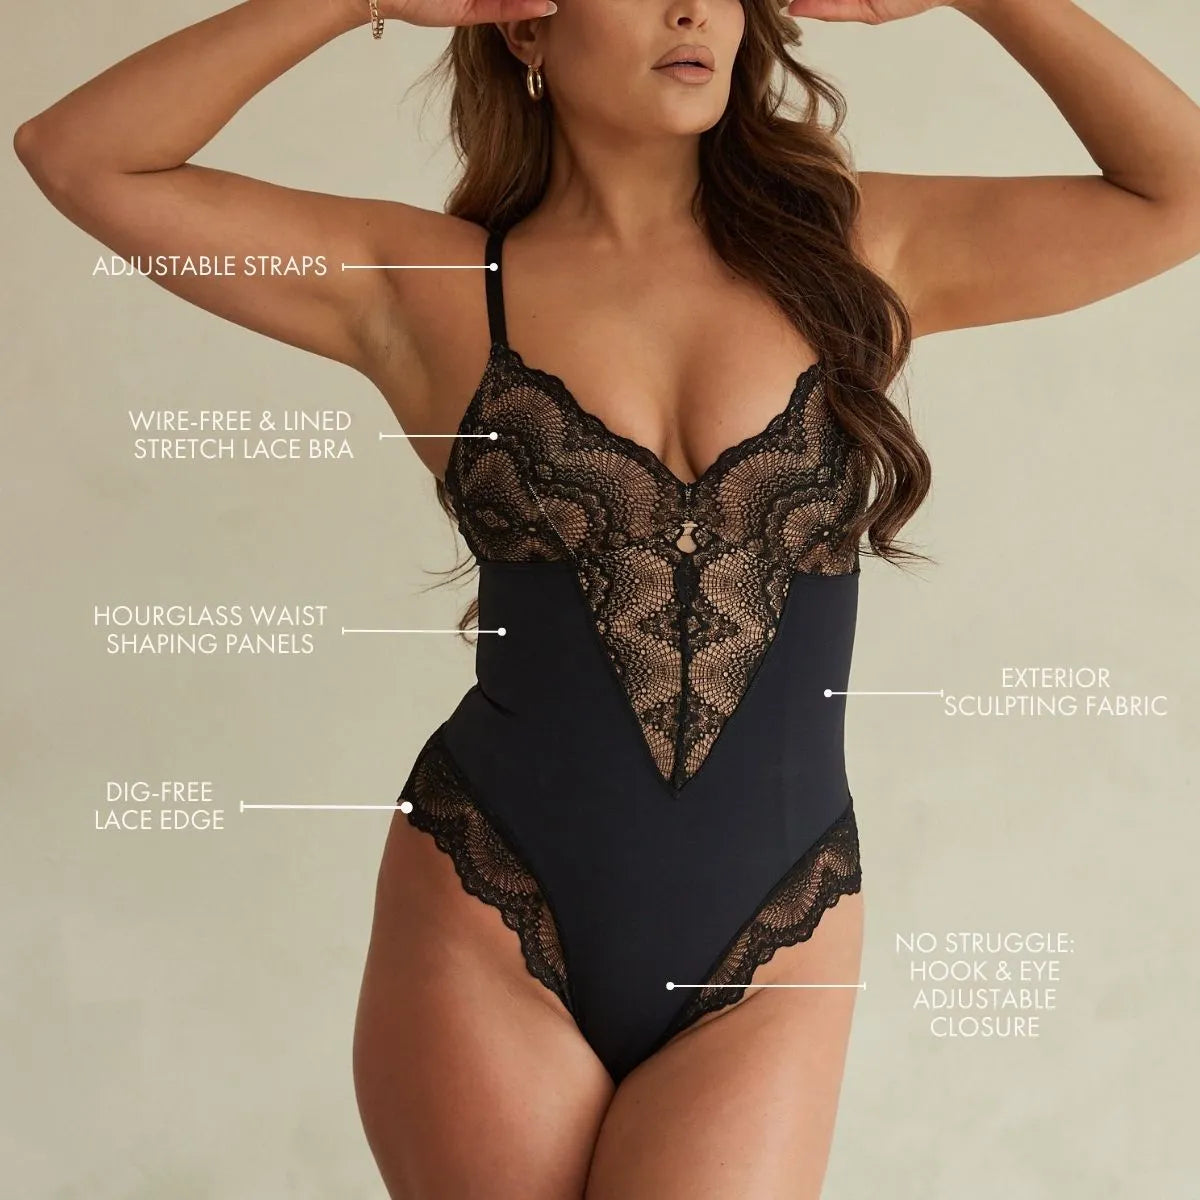 Pinsy Shapewear - Say Hello to the Best-Selling Shapewear